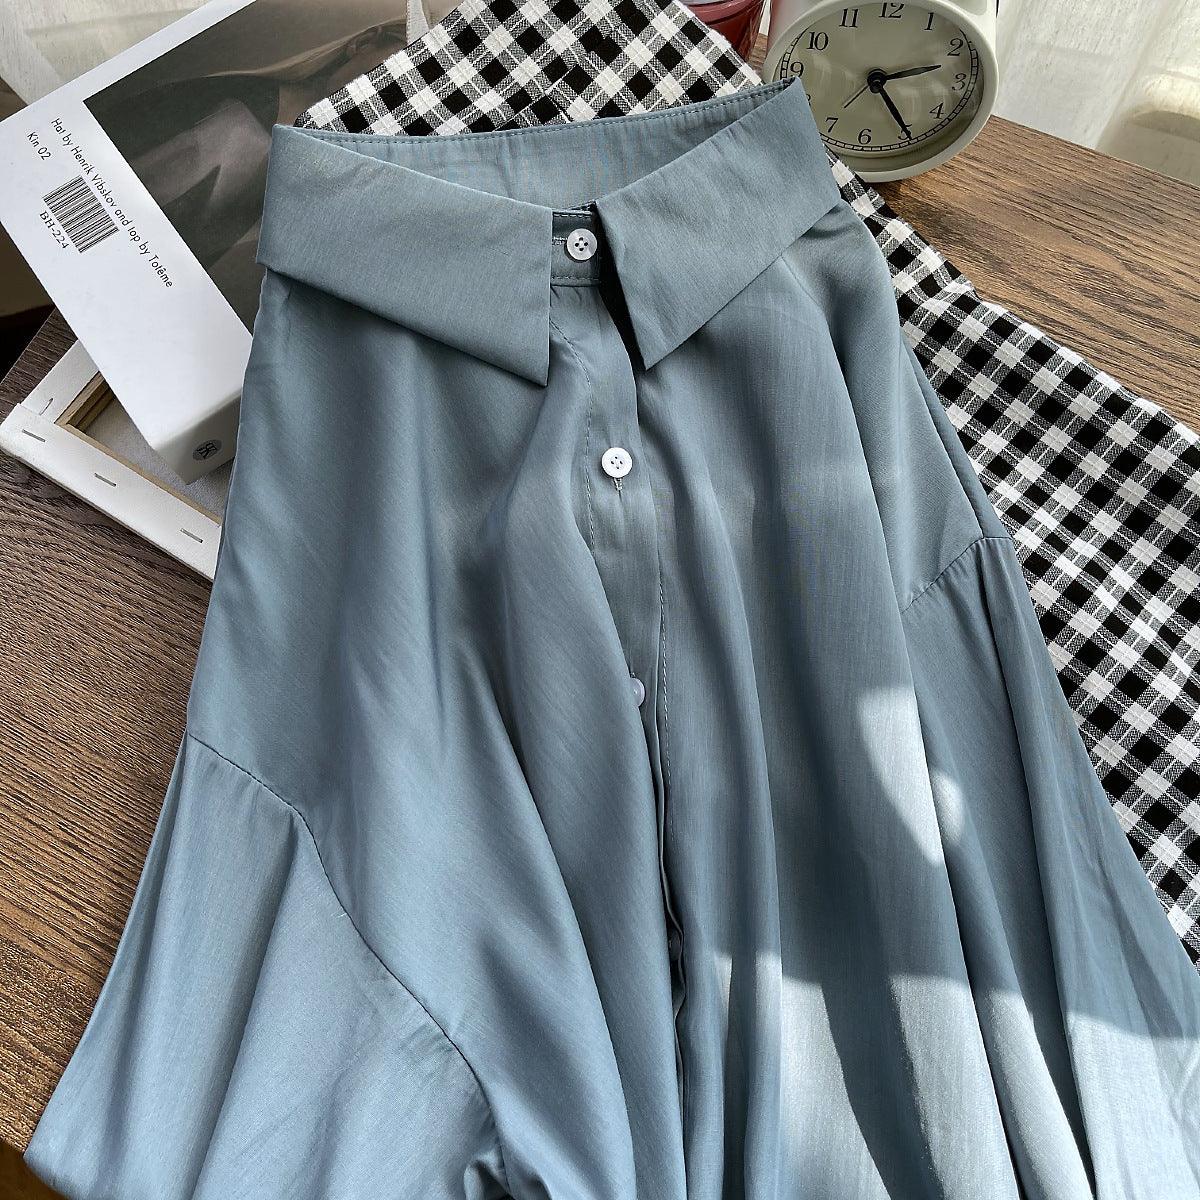 Women's Solid Color Button Down Shirt with Long Sleeves - Blue grey One size